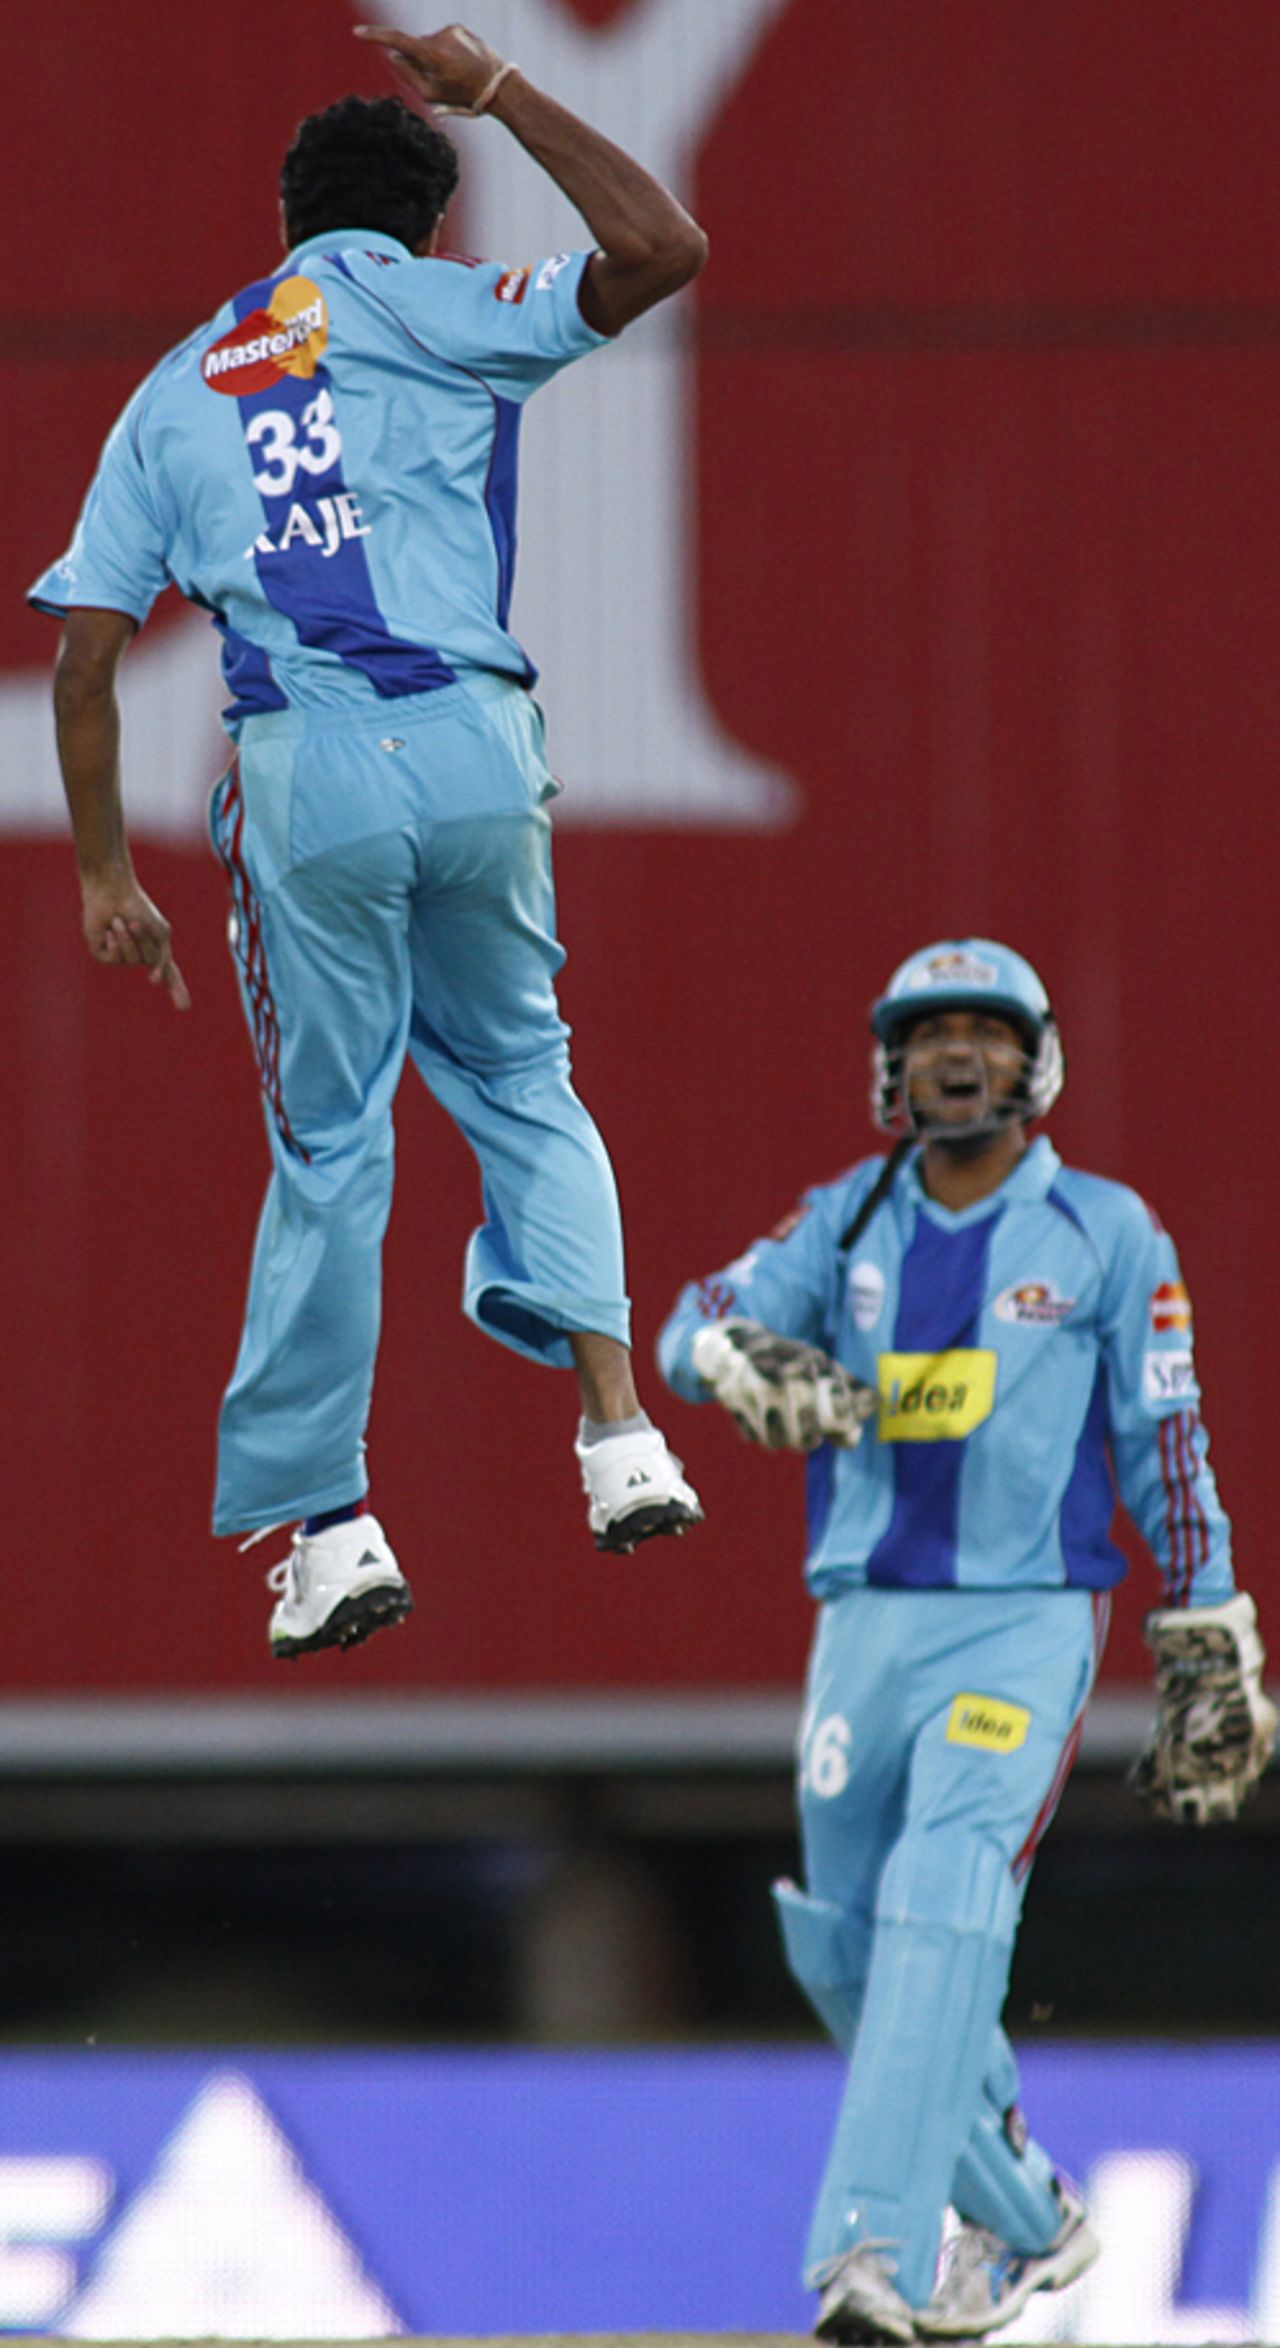 Rohan Raje jumps for joy after removing Adam Gilchrist, Deccan Chargers v Mumbai Indians, IPL, 32nd match, Centurion, May 6, 2009